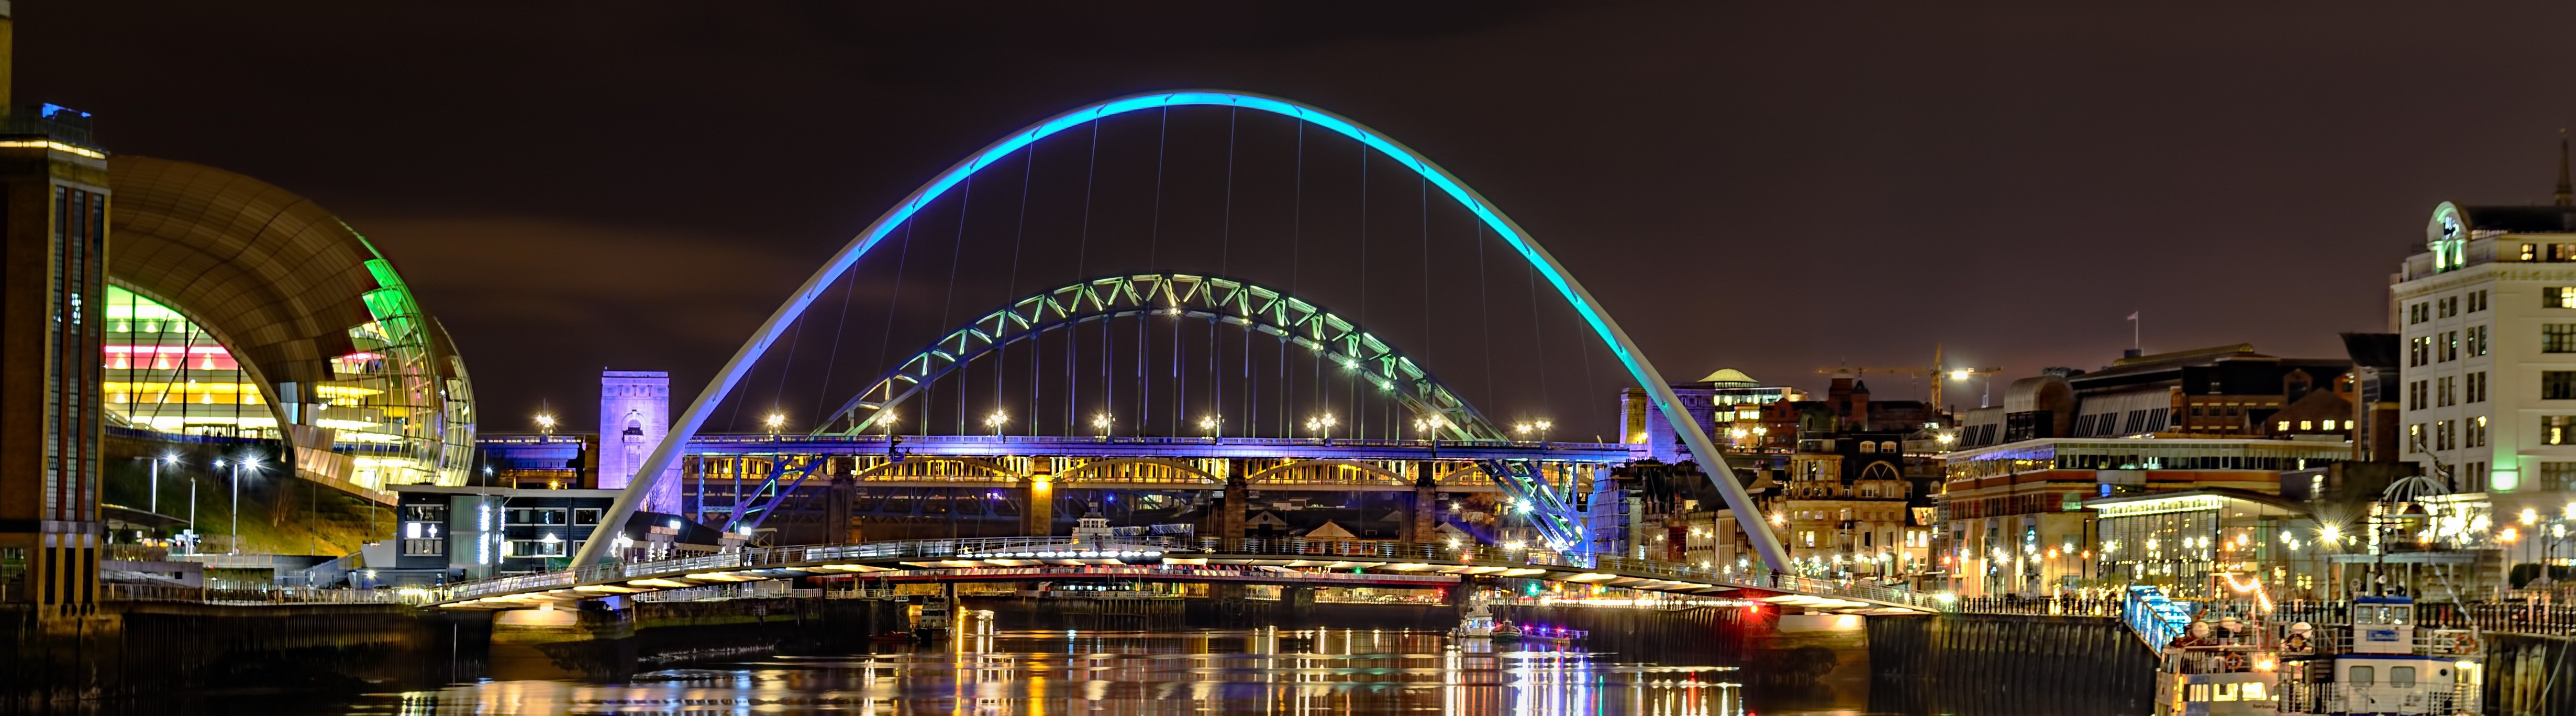 A Guide To Independent Christmas Shopping in Newcastle